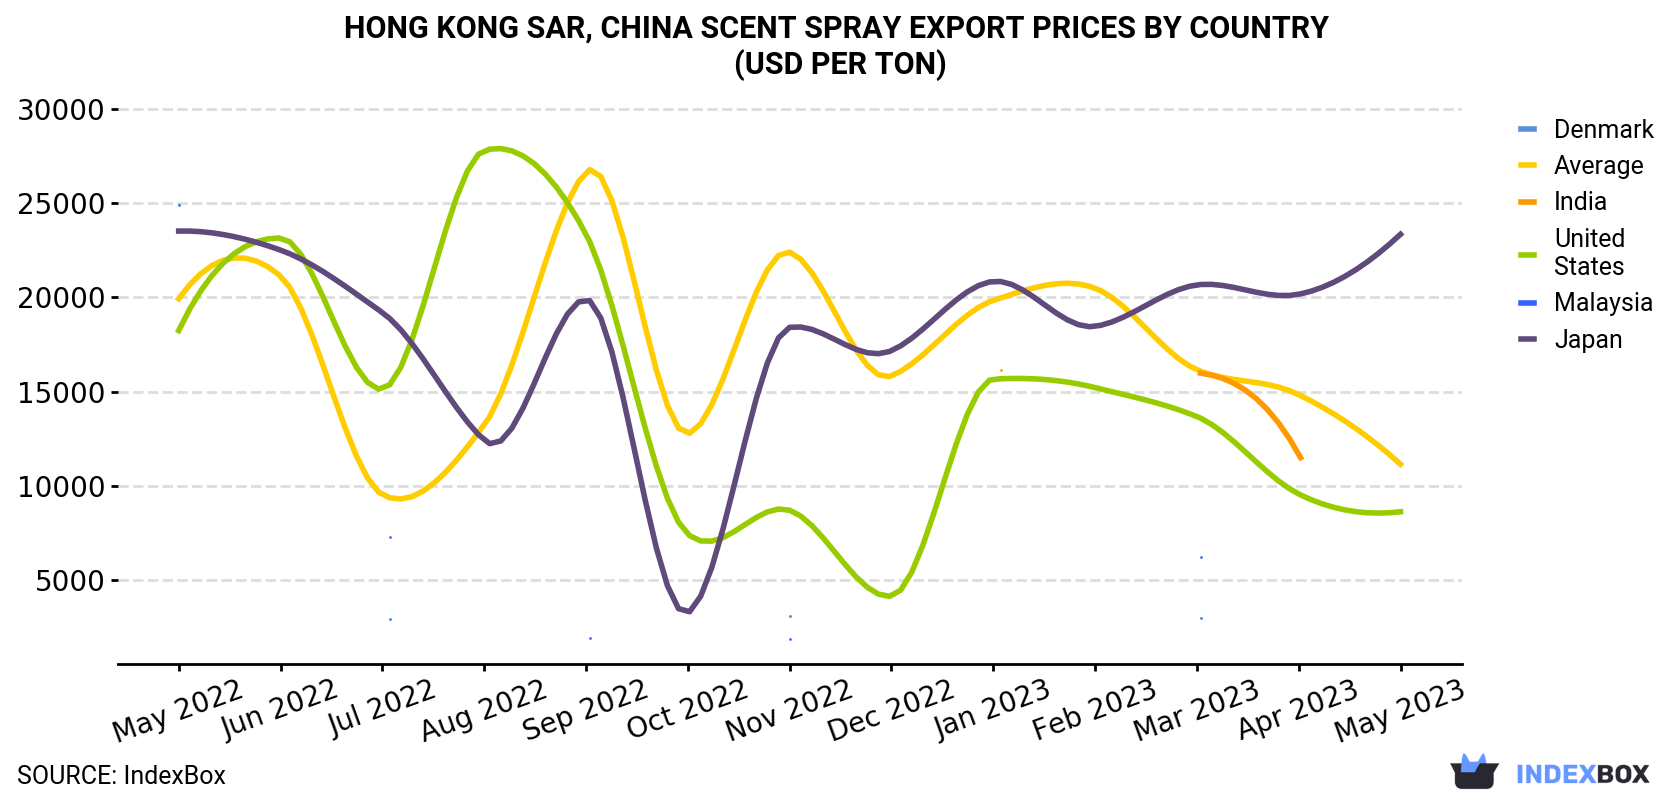 Hong Kong Scent Spray Export Prices By Country (USD Per Ton)